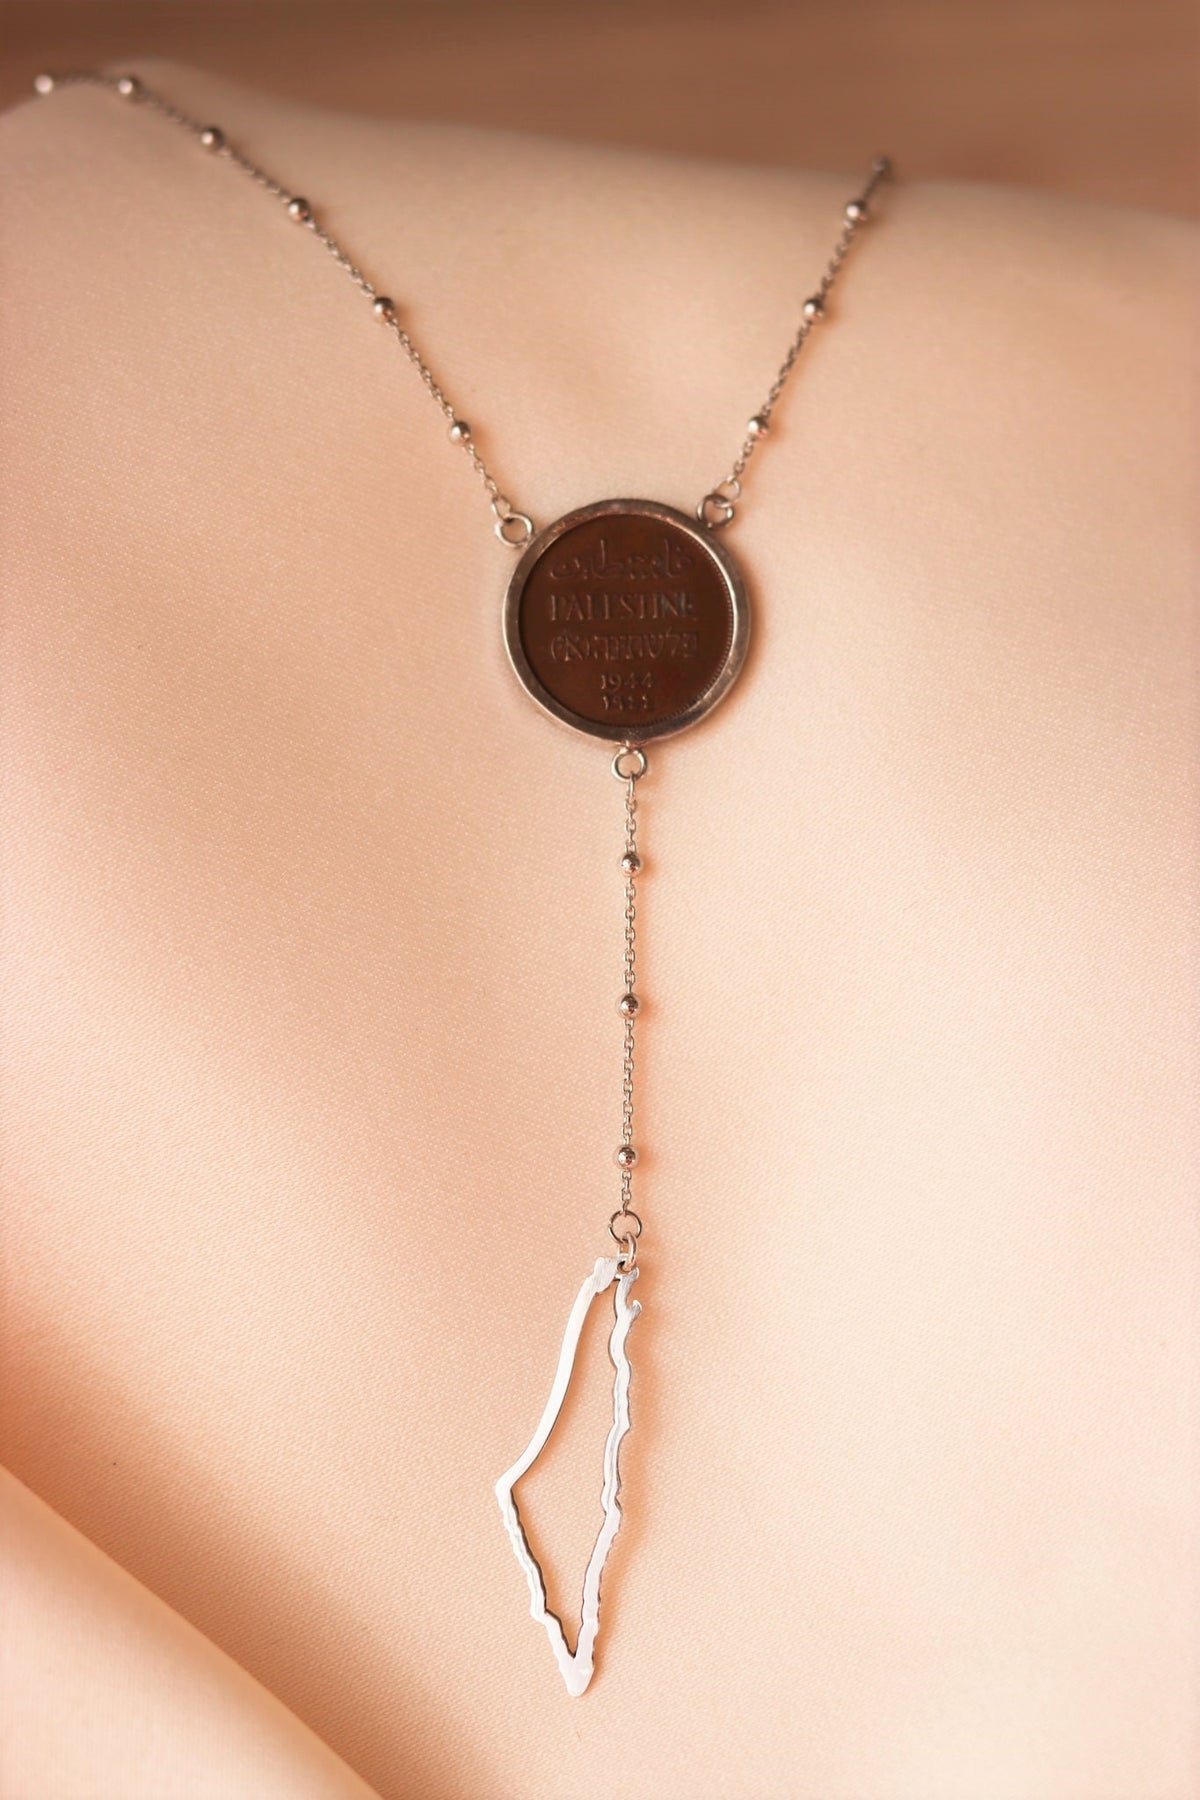 Palestinian coin 1 mil with Palestine map frame necklace